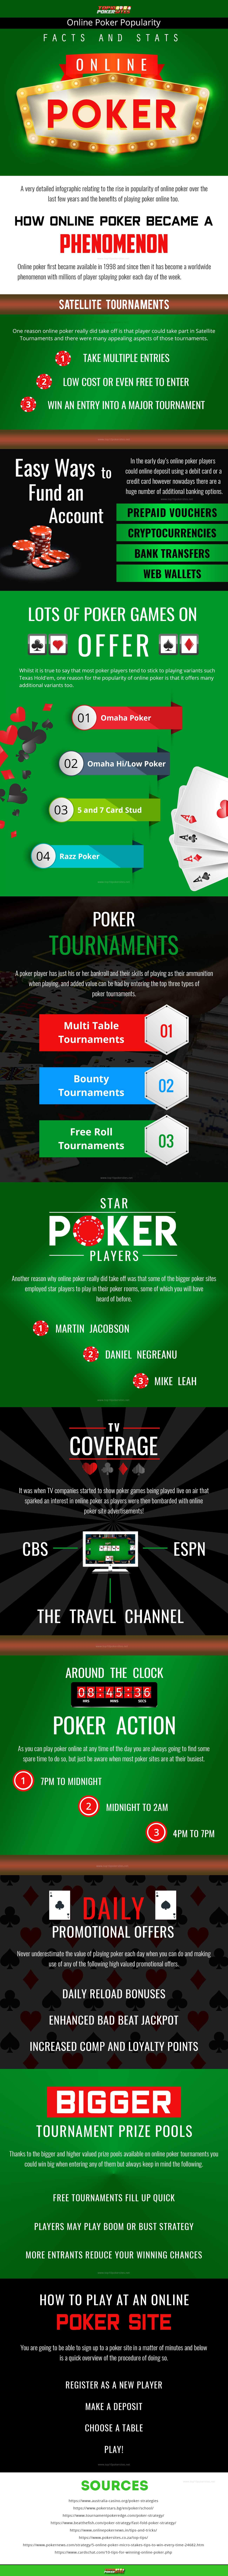 Infographic on How Online Poker Became a Phenomenon